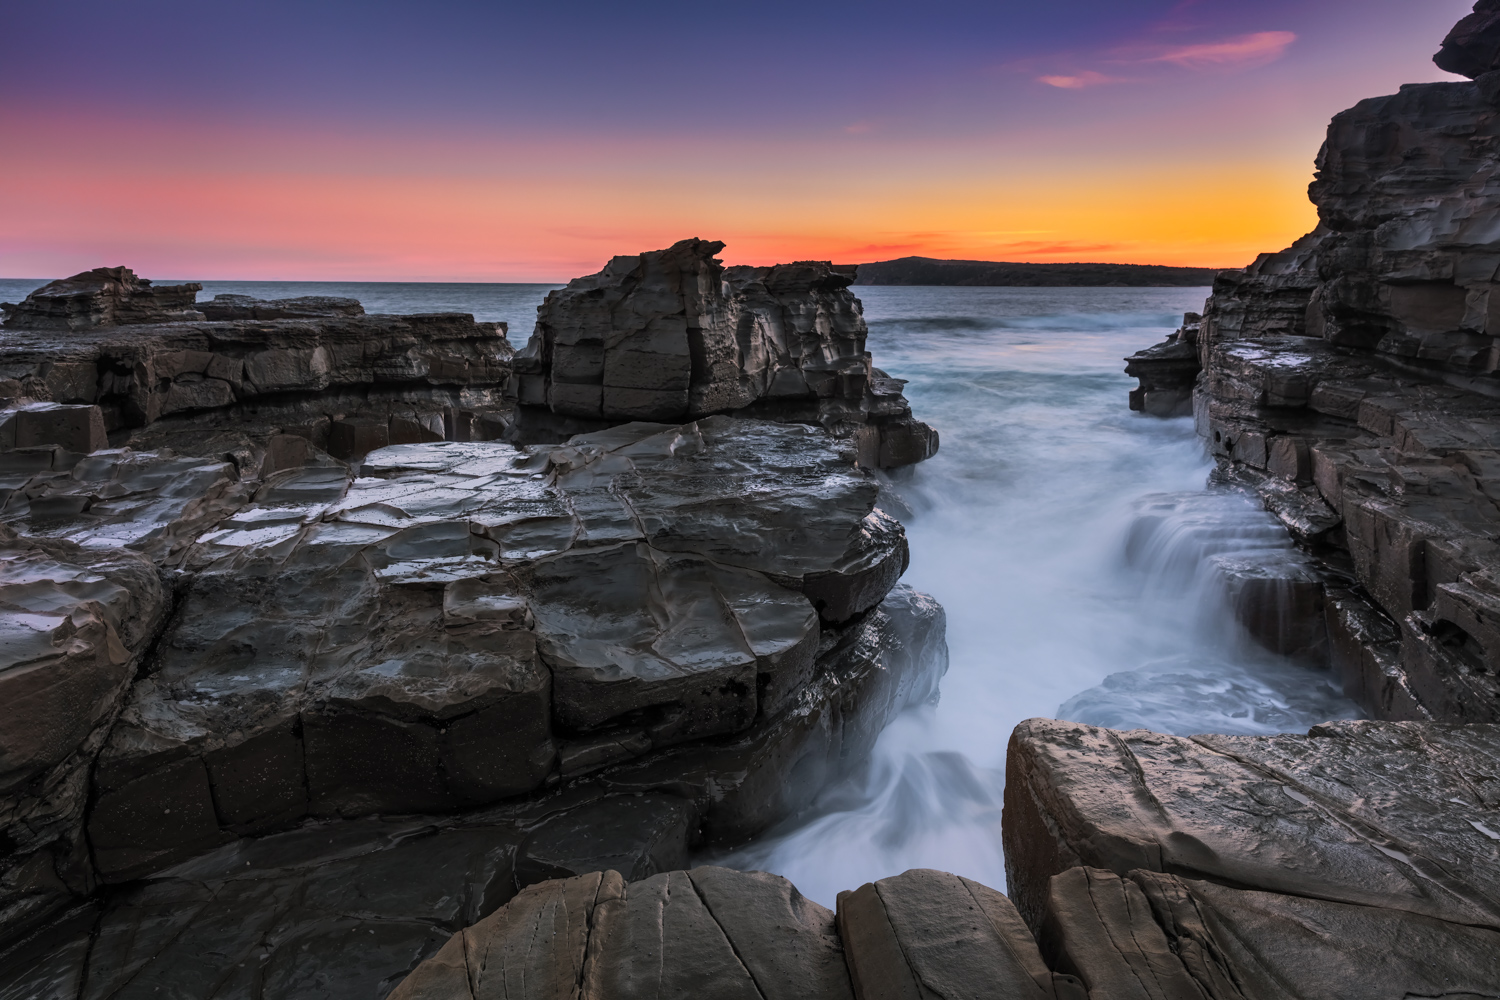 Long Exposure Photography Workshop - Cadillac Canyon, San Remo, Melbourne Photography